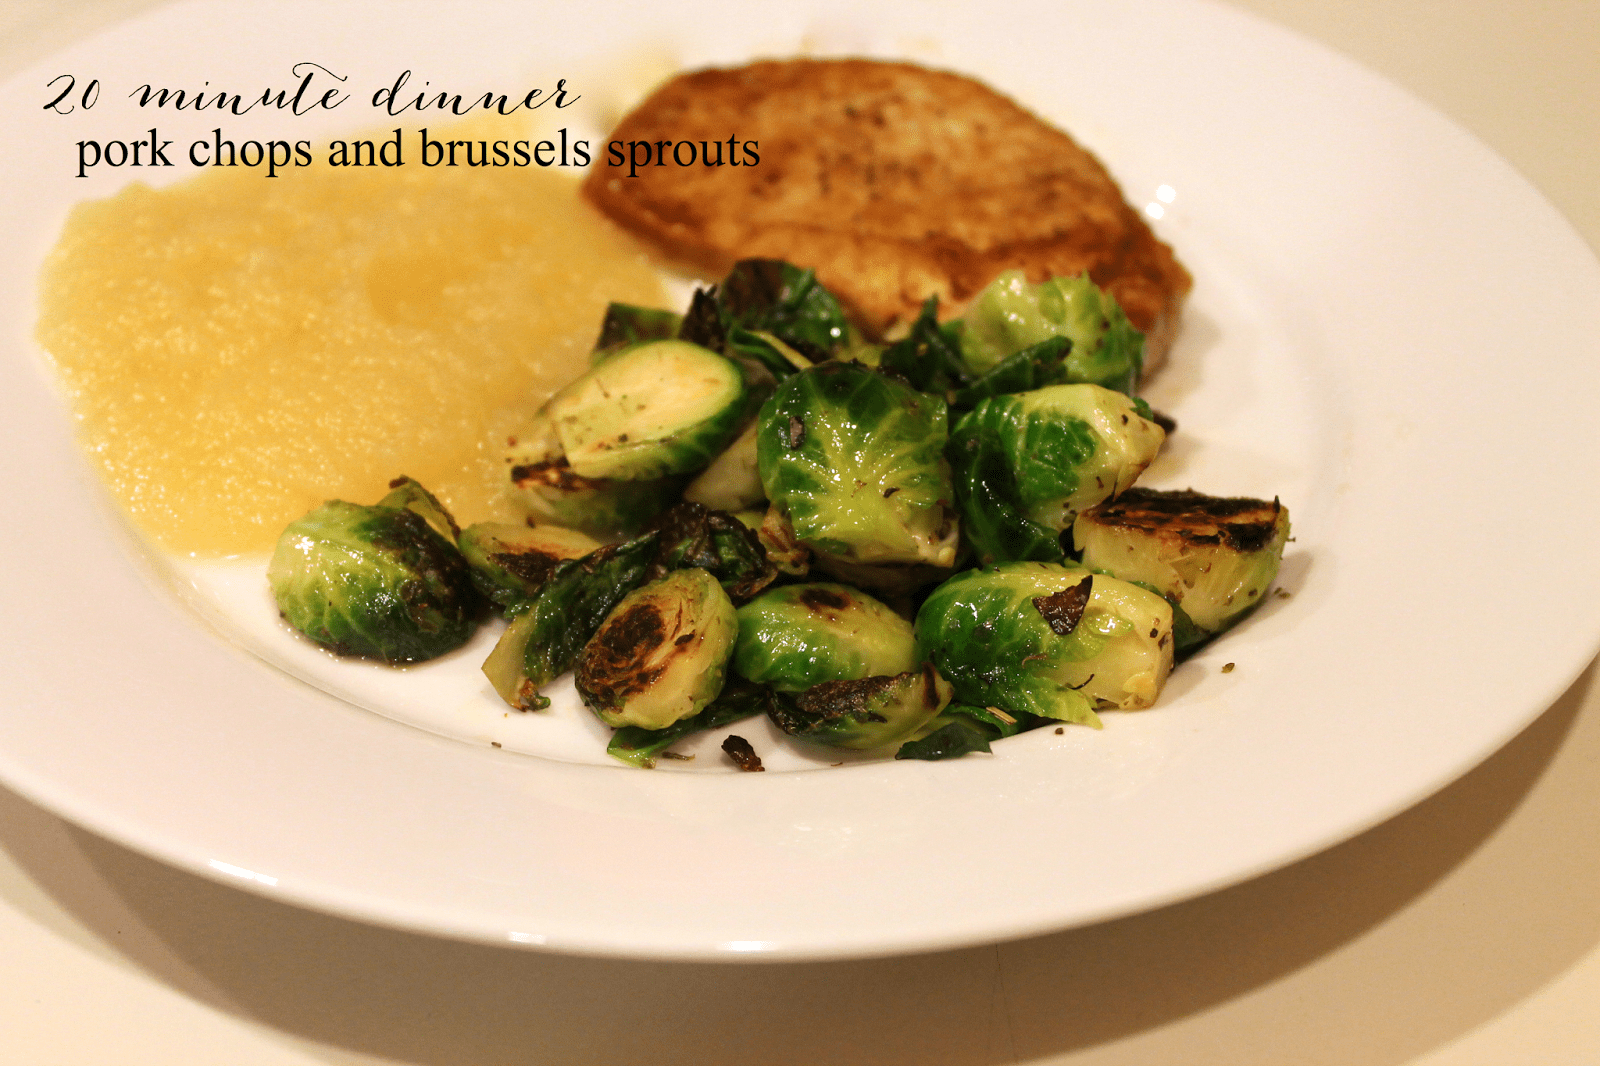 20 Minute Dinner: Pork Chops and Brussels Sprouts